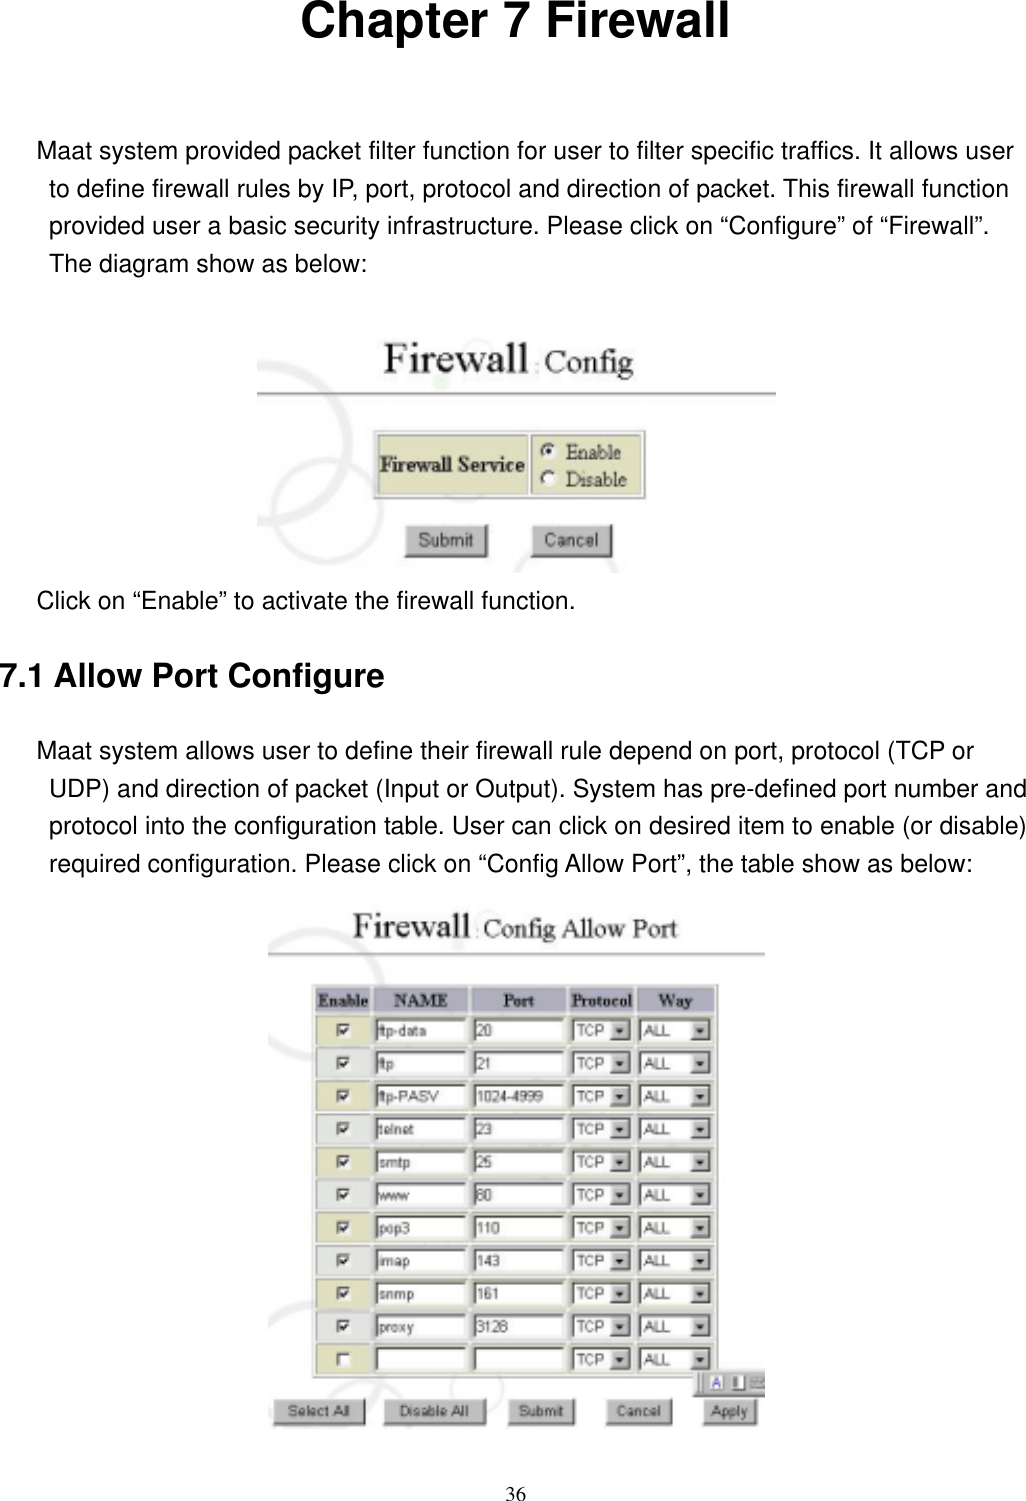  36Chapter 7 Firewall     Maat system provided packet filter function for user to filter specific traffics. It allows user to define firewall rules by IP, port, protocol and direction of packet. This firewall function provided user a basic security infrastructure. Please click on “Configure” of “Firewall”. The diagram show as below:         Click on “Enable” to activate the firewall function. 7.1 Allow Port Configure      Maat system allows user to define their firewall rule depend on port, protocol (TCP or UDP) and direction of packet (Input or Output). System has pre-defined port number and protocol into the configuration table. User can click on desired item to enable (or disable) required configuration. Please click on “Config Allow Port”, the table show as below:  